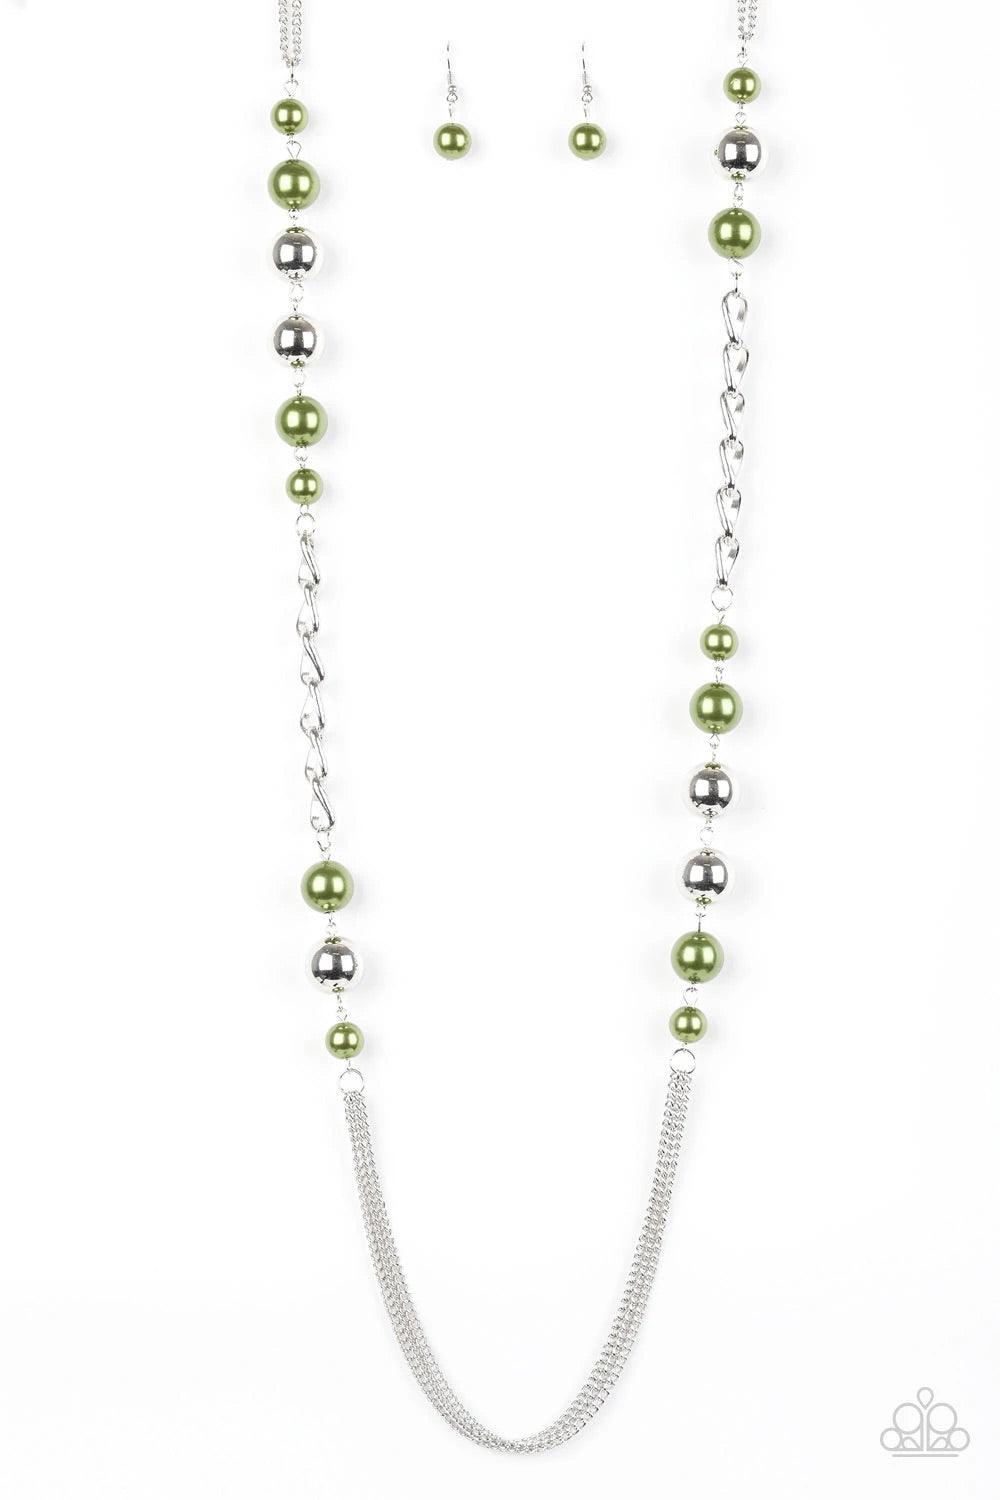 Paparazzi Accessories Uptown Talker - Green Varying in size, pearly green and oversized silver beads give way to sections of bold silver chain. Layers of silver chains drape across the bottom of the design for a flawless finish. Features an adjustable cla